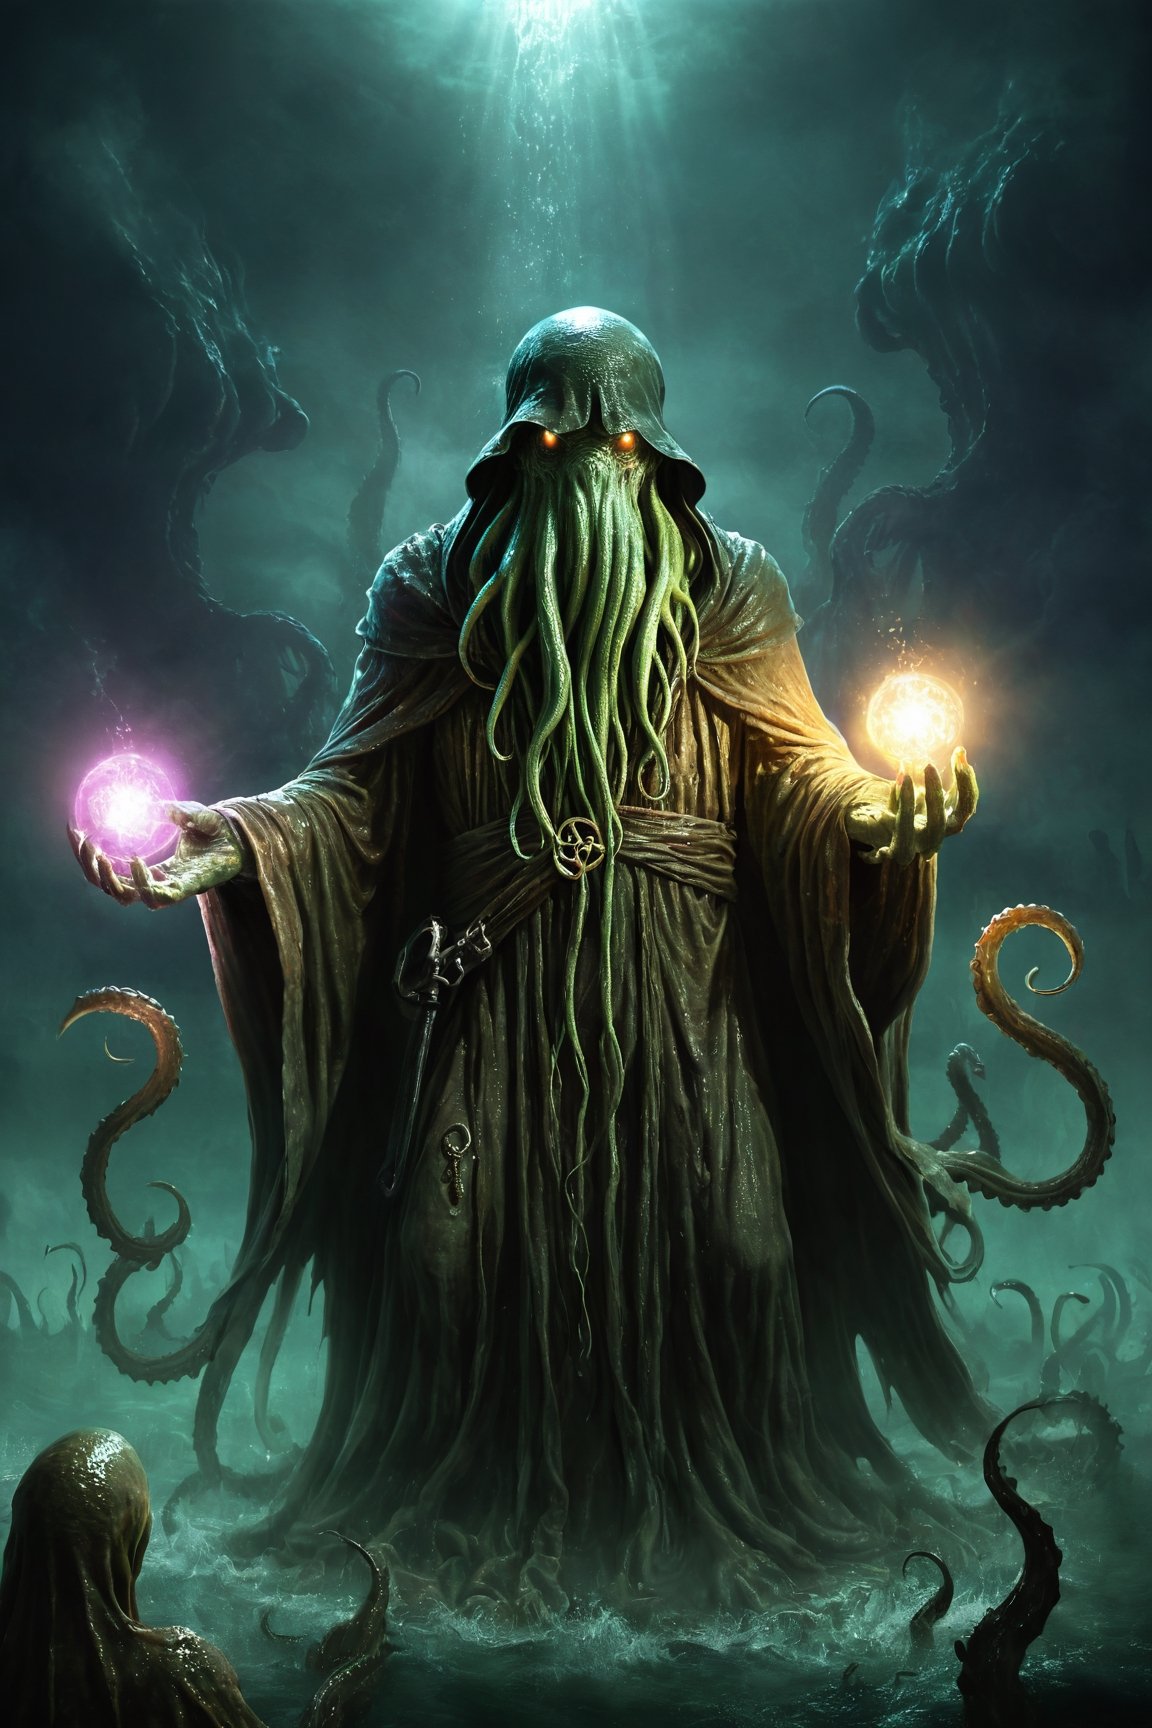 Missionary Cthulhu,emerges from the depths with an otherworldly aura, blending the devout zeal of a missionary with the unfathomable terror of Cthulhu. Cloaked in tattered robes adorned with symbols of ancient cults, it carries a tome filled with forbidden knowledge and dark prophecies. Its eyes glow with an unearthly light as it spreads its message of cosmic dominion to the far corners of the earth. With each step, it leaves behind a trail of madness and despair, converting the unsuspecting into fervent followers of the eldritch faith. The Missionary Cthulhu is a harbinger of doom,LegendDarkFantasy